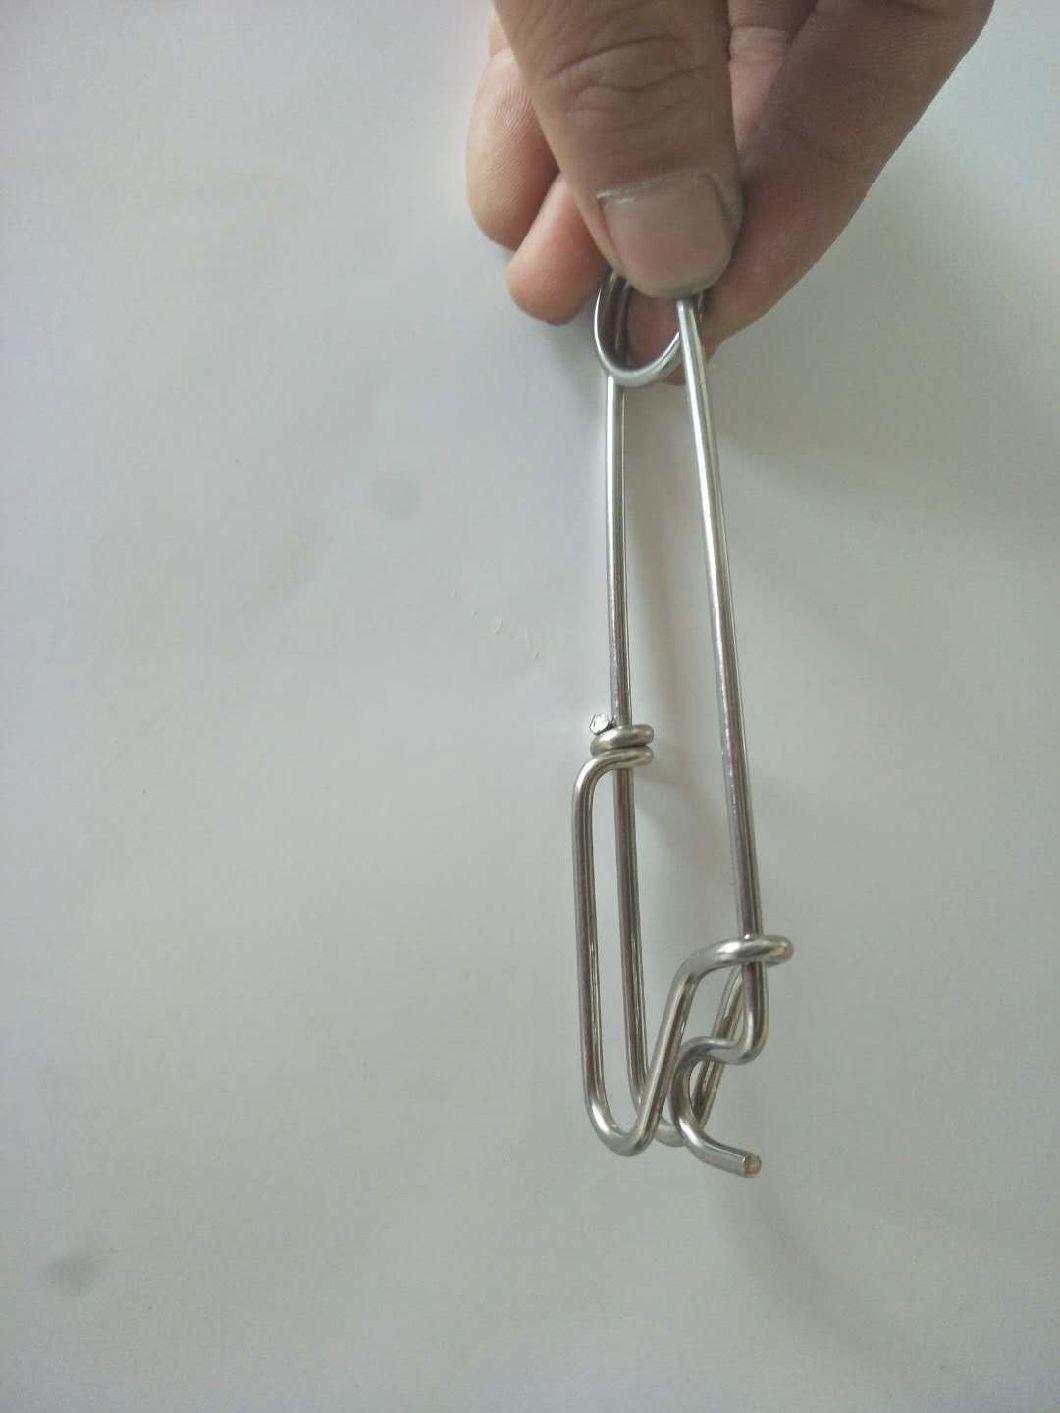 S/S 304 Stainless Steel Open Eye Clips for Fishing Tackles